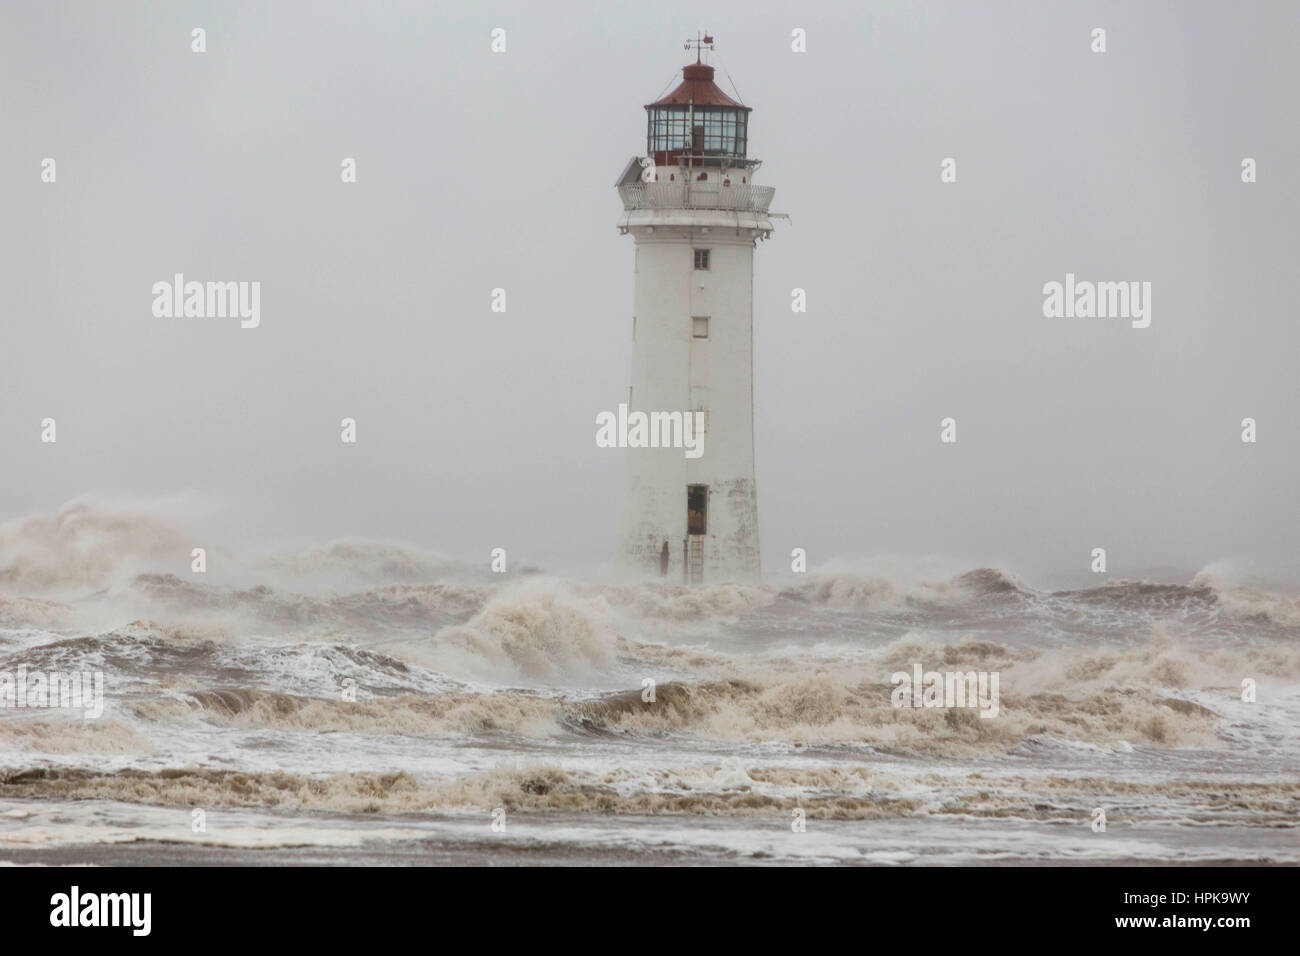 New Brighton, UK. 23rd Feb, 2017. High winds from Storm Doris batter the coastline at New Brighton on the Wirrall in the North West of England today (Thursday 23rd February) Waves hit Perch Rock Lighthouse. Picture by Credit: Chris Bull/Alamy Live News Stock Photo